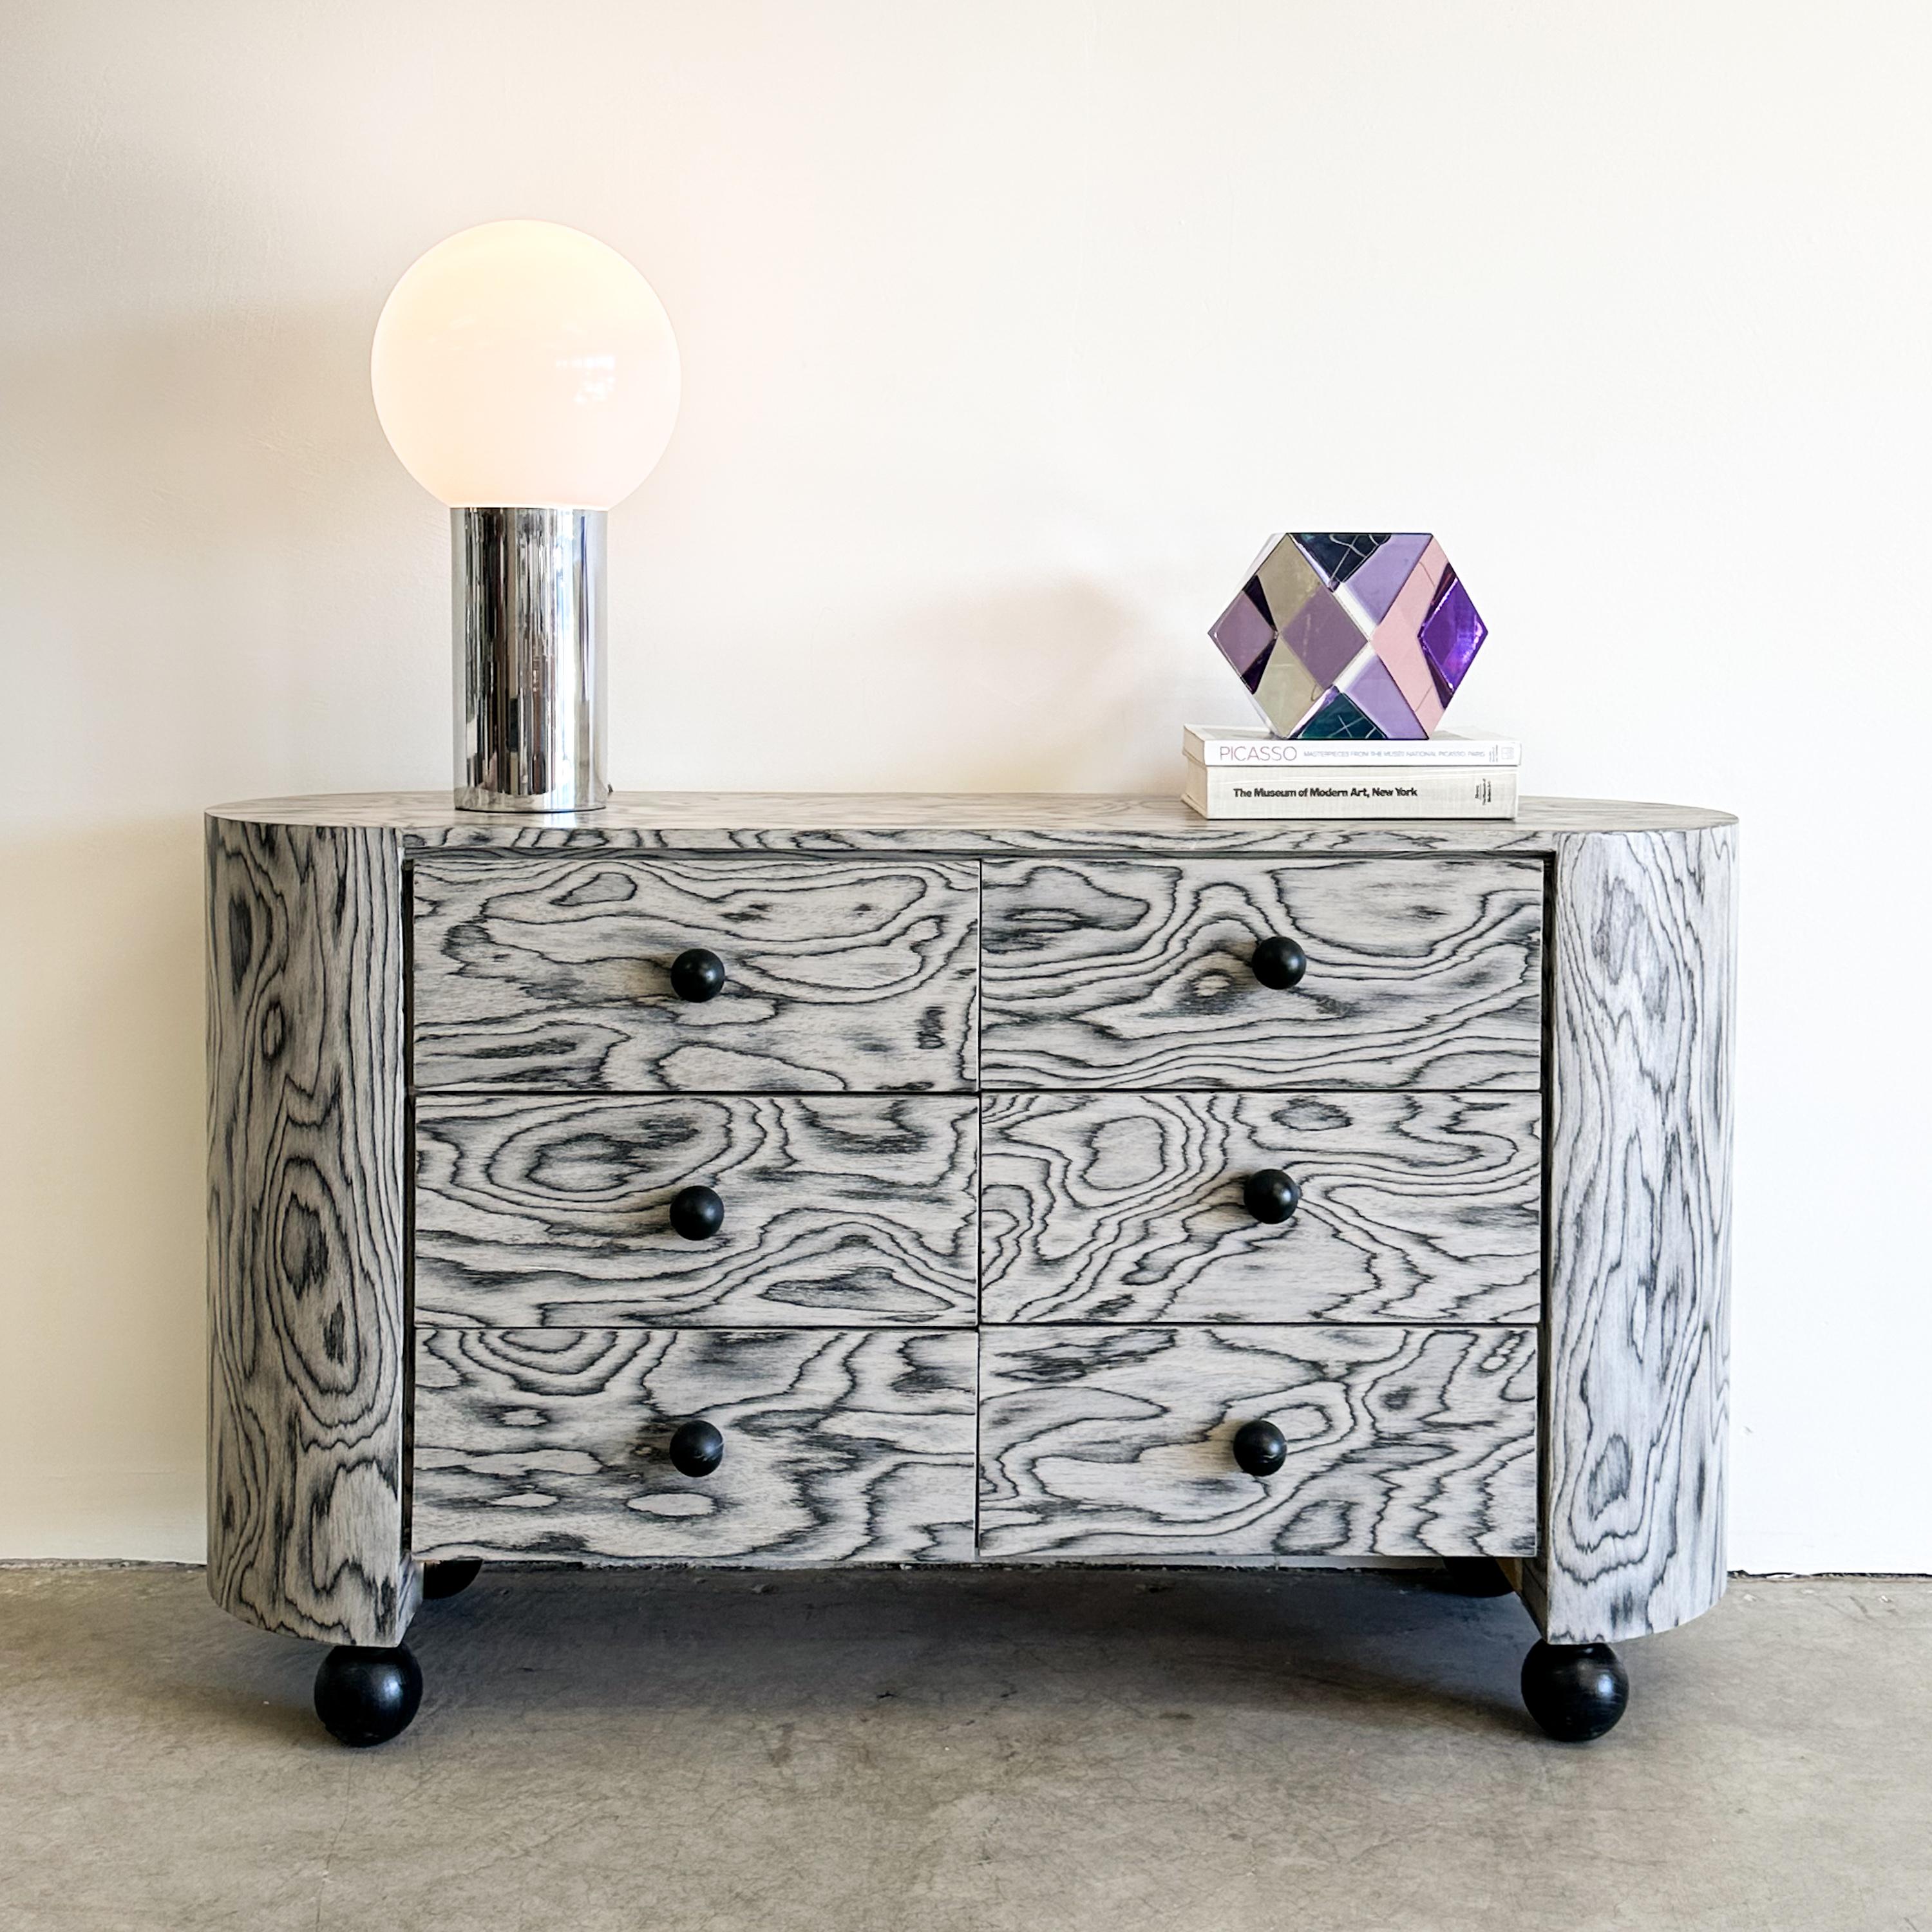 This vintage dresser features re-veneering with the original ALPI veneer, designed by Ettore Sottsass in 1985 an iconic figure in the Memphis design movement. Its distinctive veneer has been sealed with a satin finish to enhance durability. The